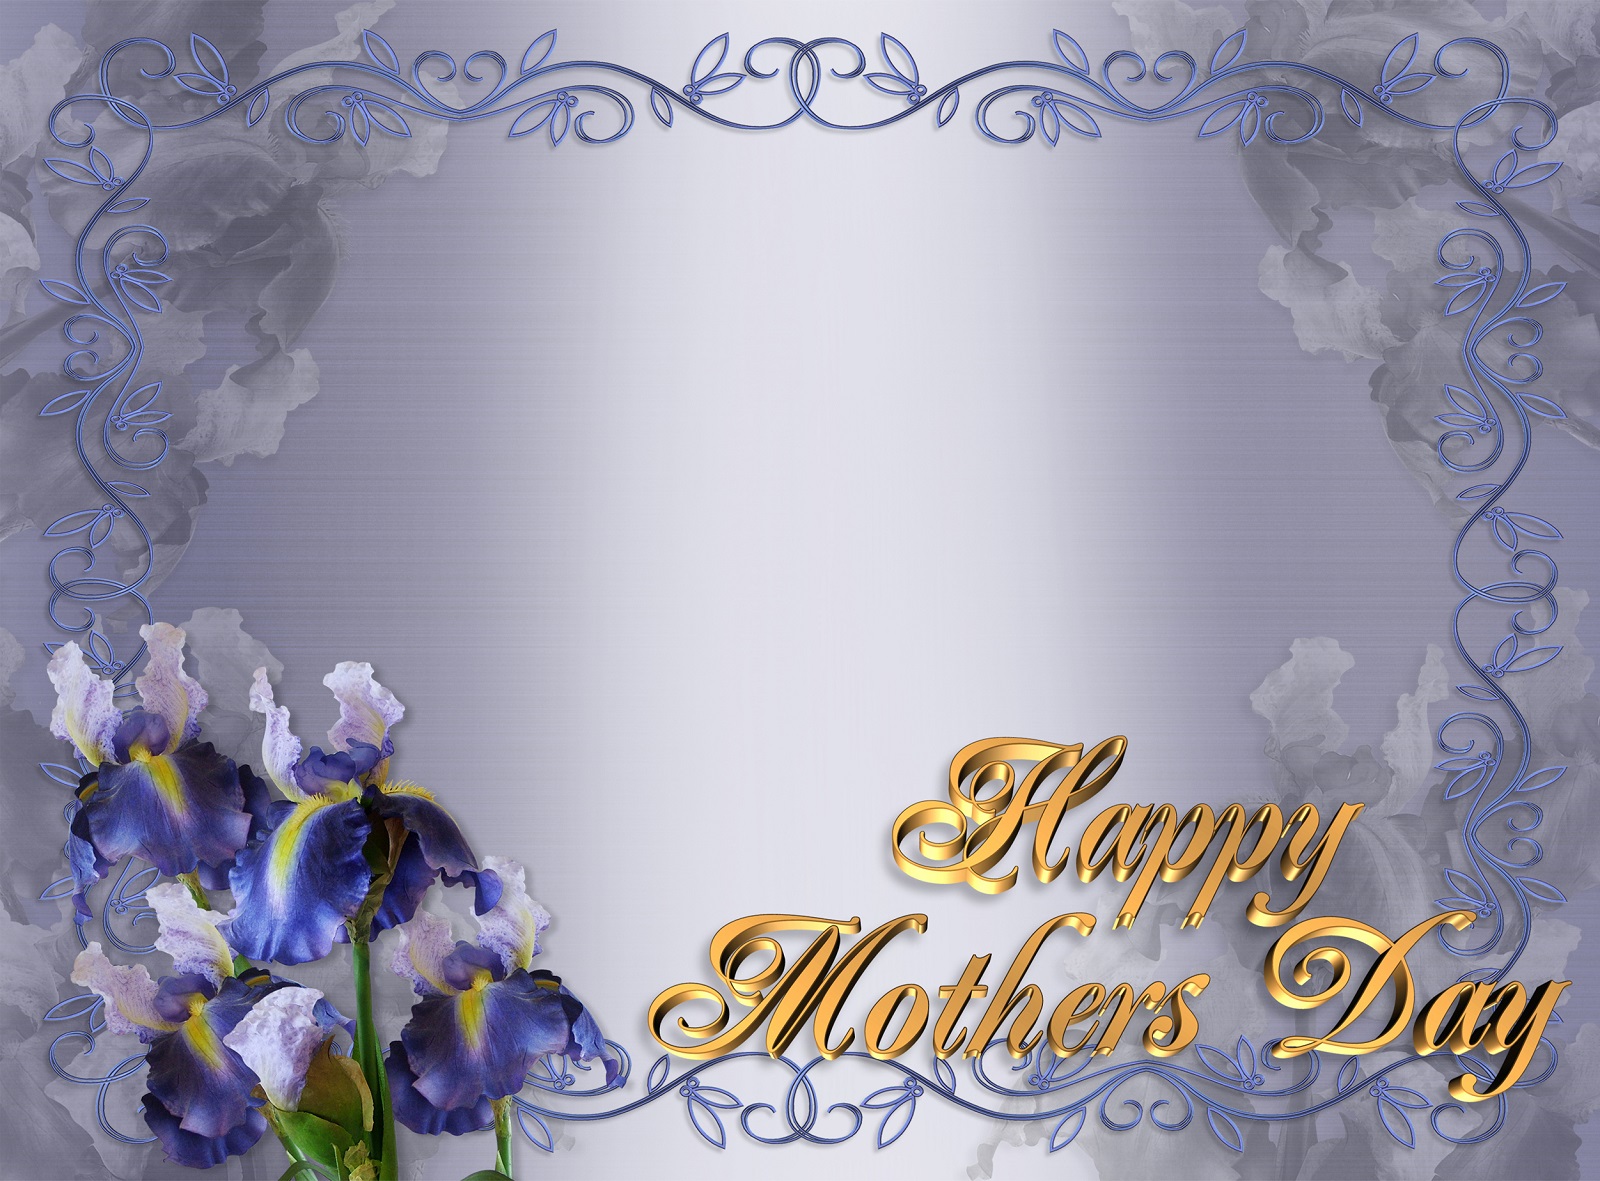 Happy Mothers Day 2018 for Jean-Luc Andriot blog 051318